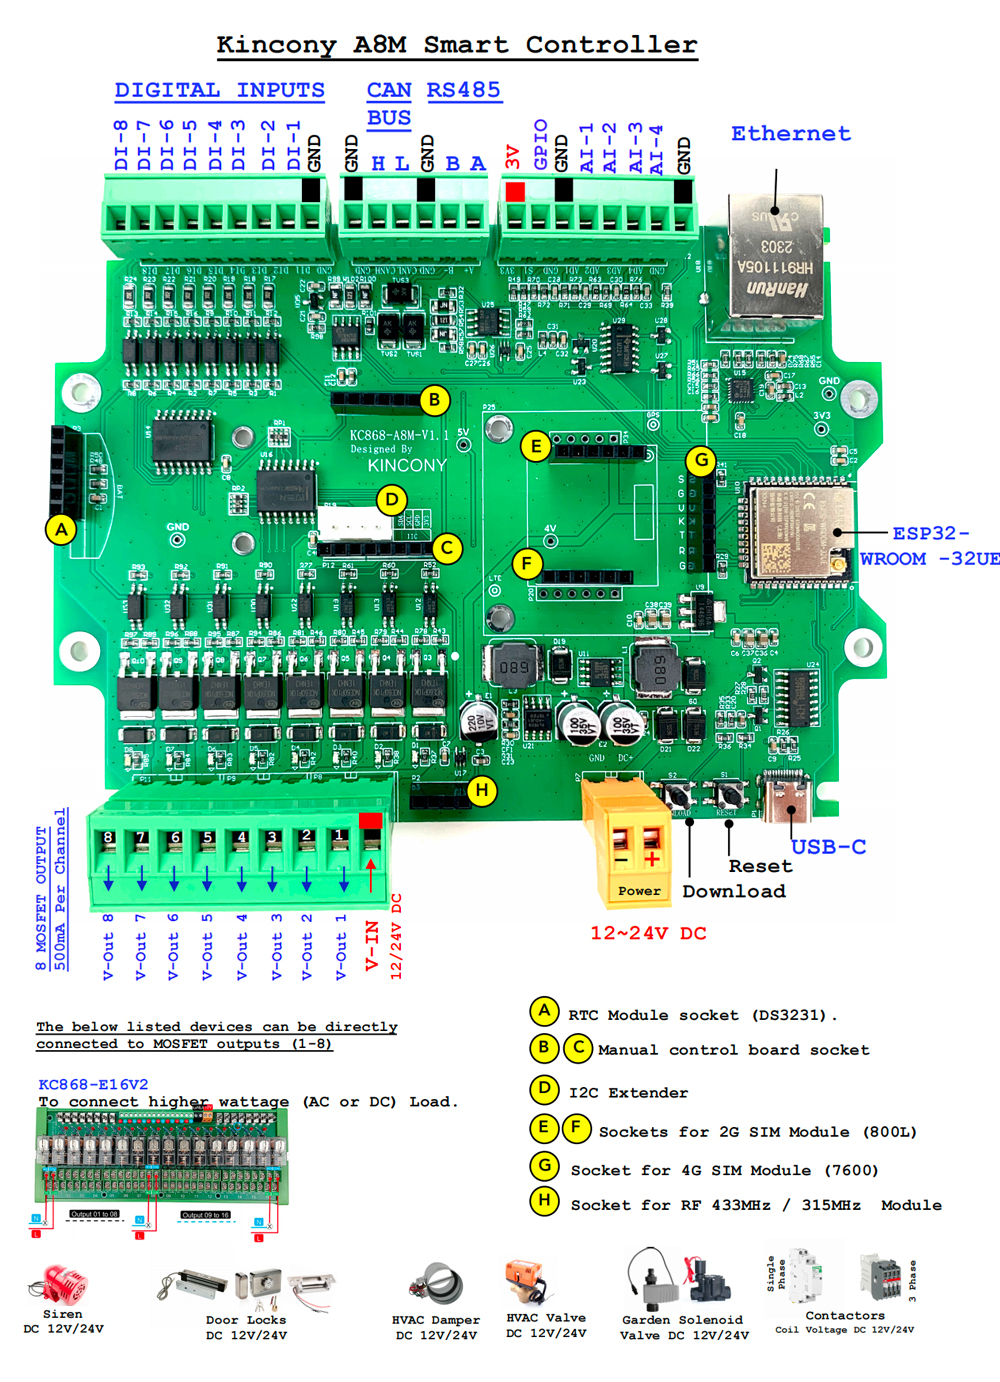 8 Channel ESP32 CAN Bus Board – KC868-A8M 